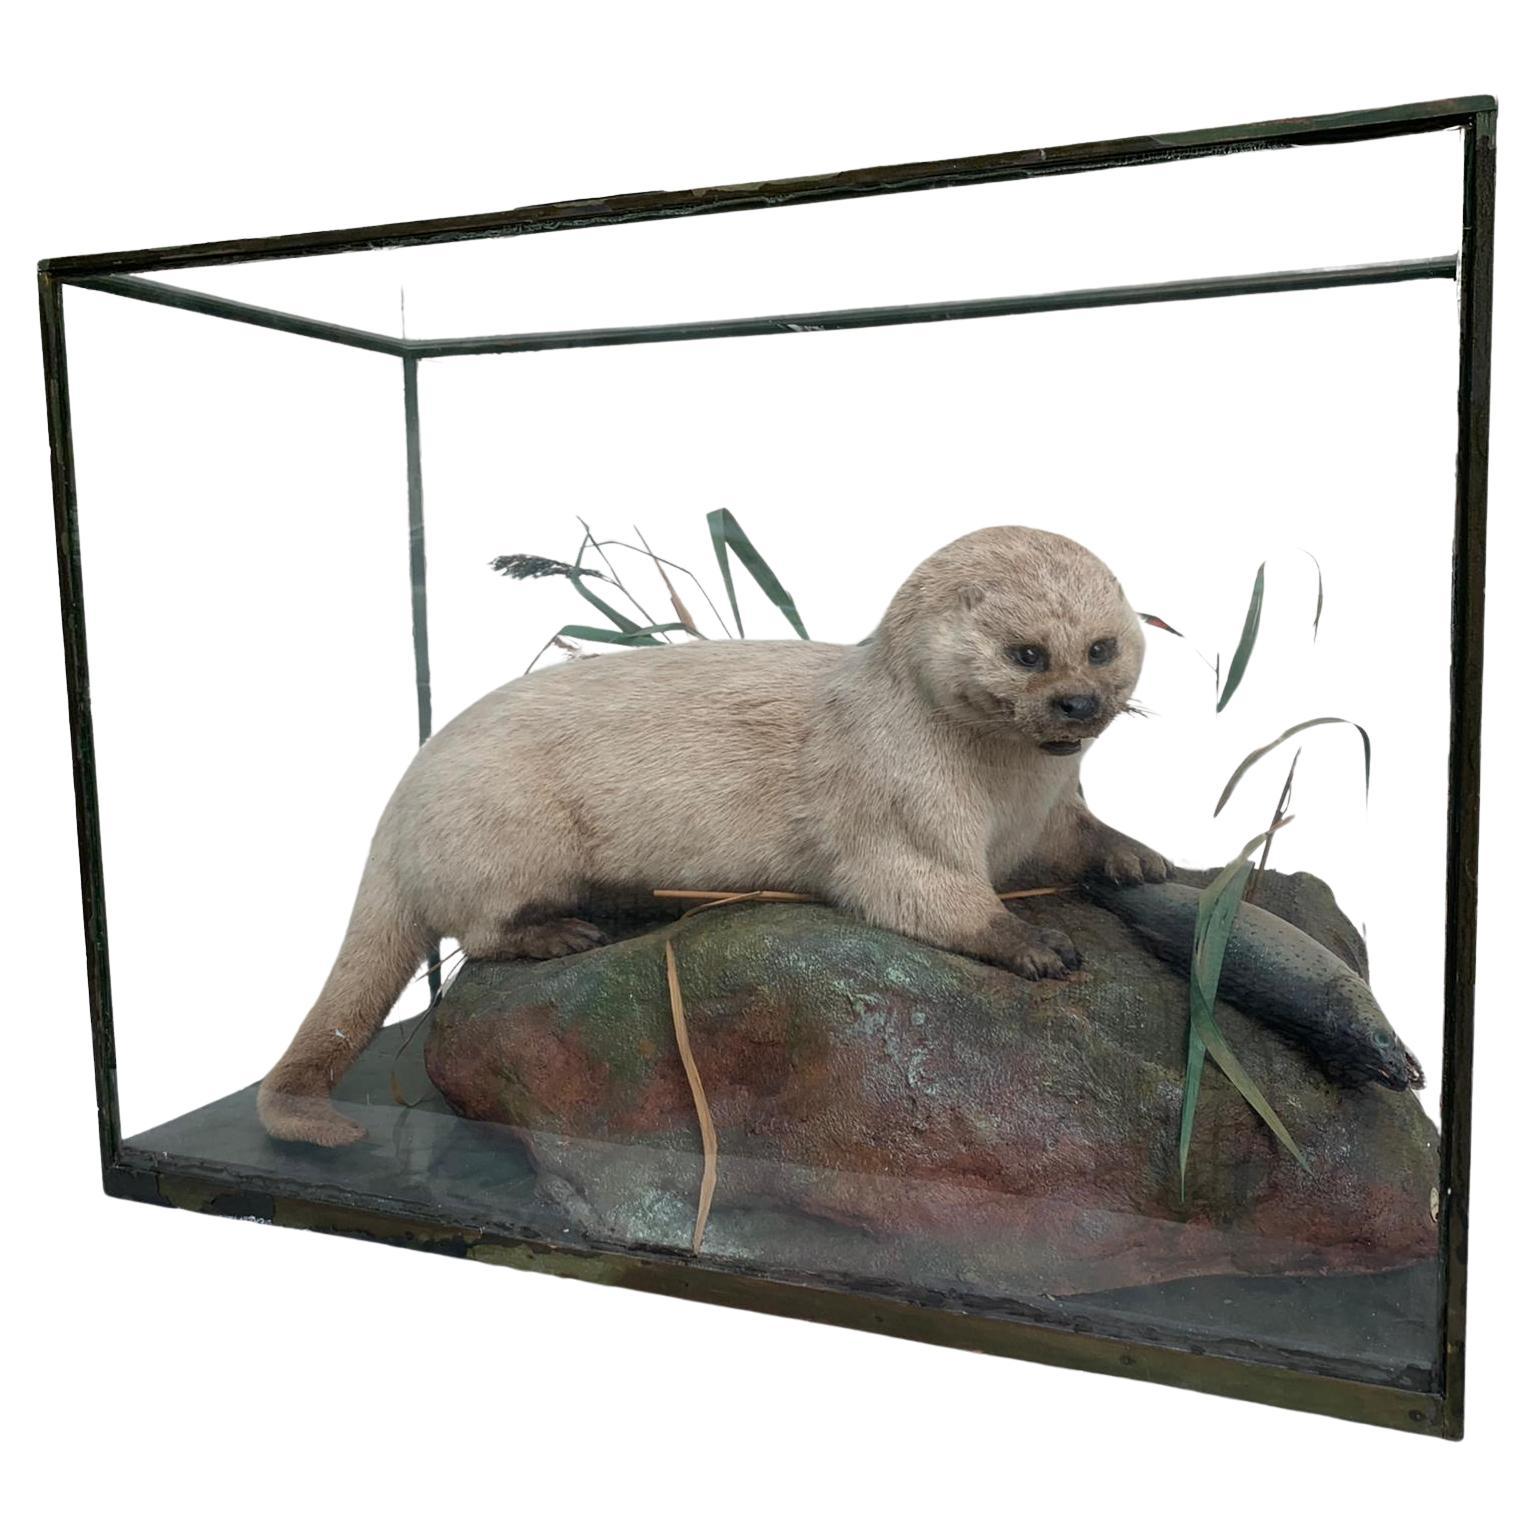 Otter and Loss, Taxidermy in a Glass Machine, London Piccadilly For Sale